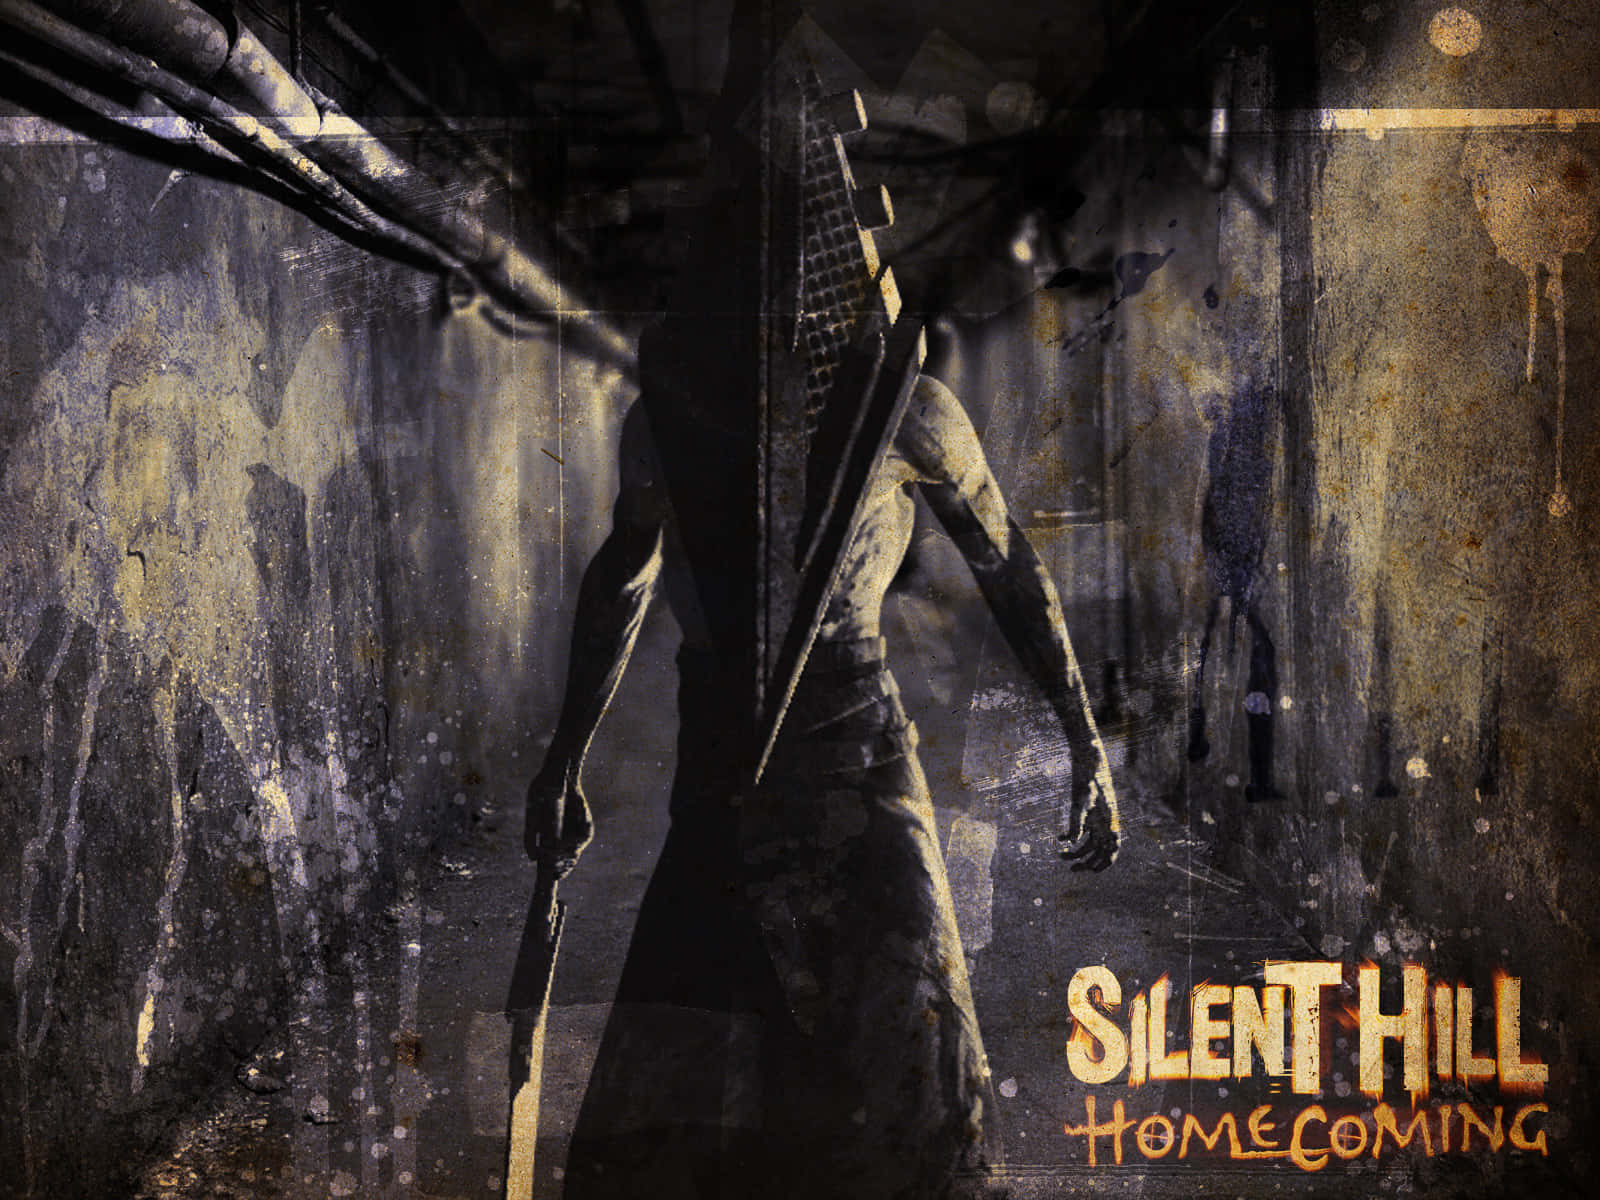 "The Town of Silent Hill"